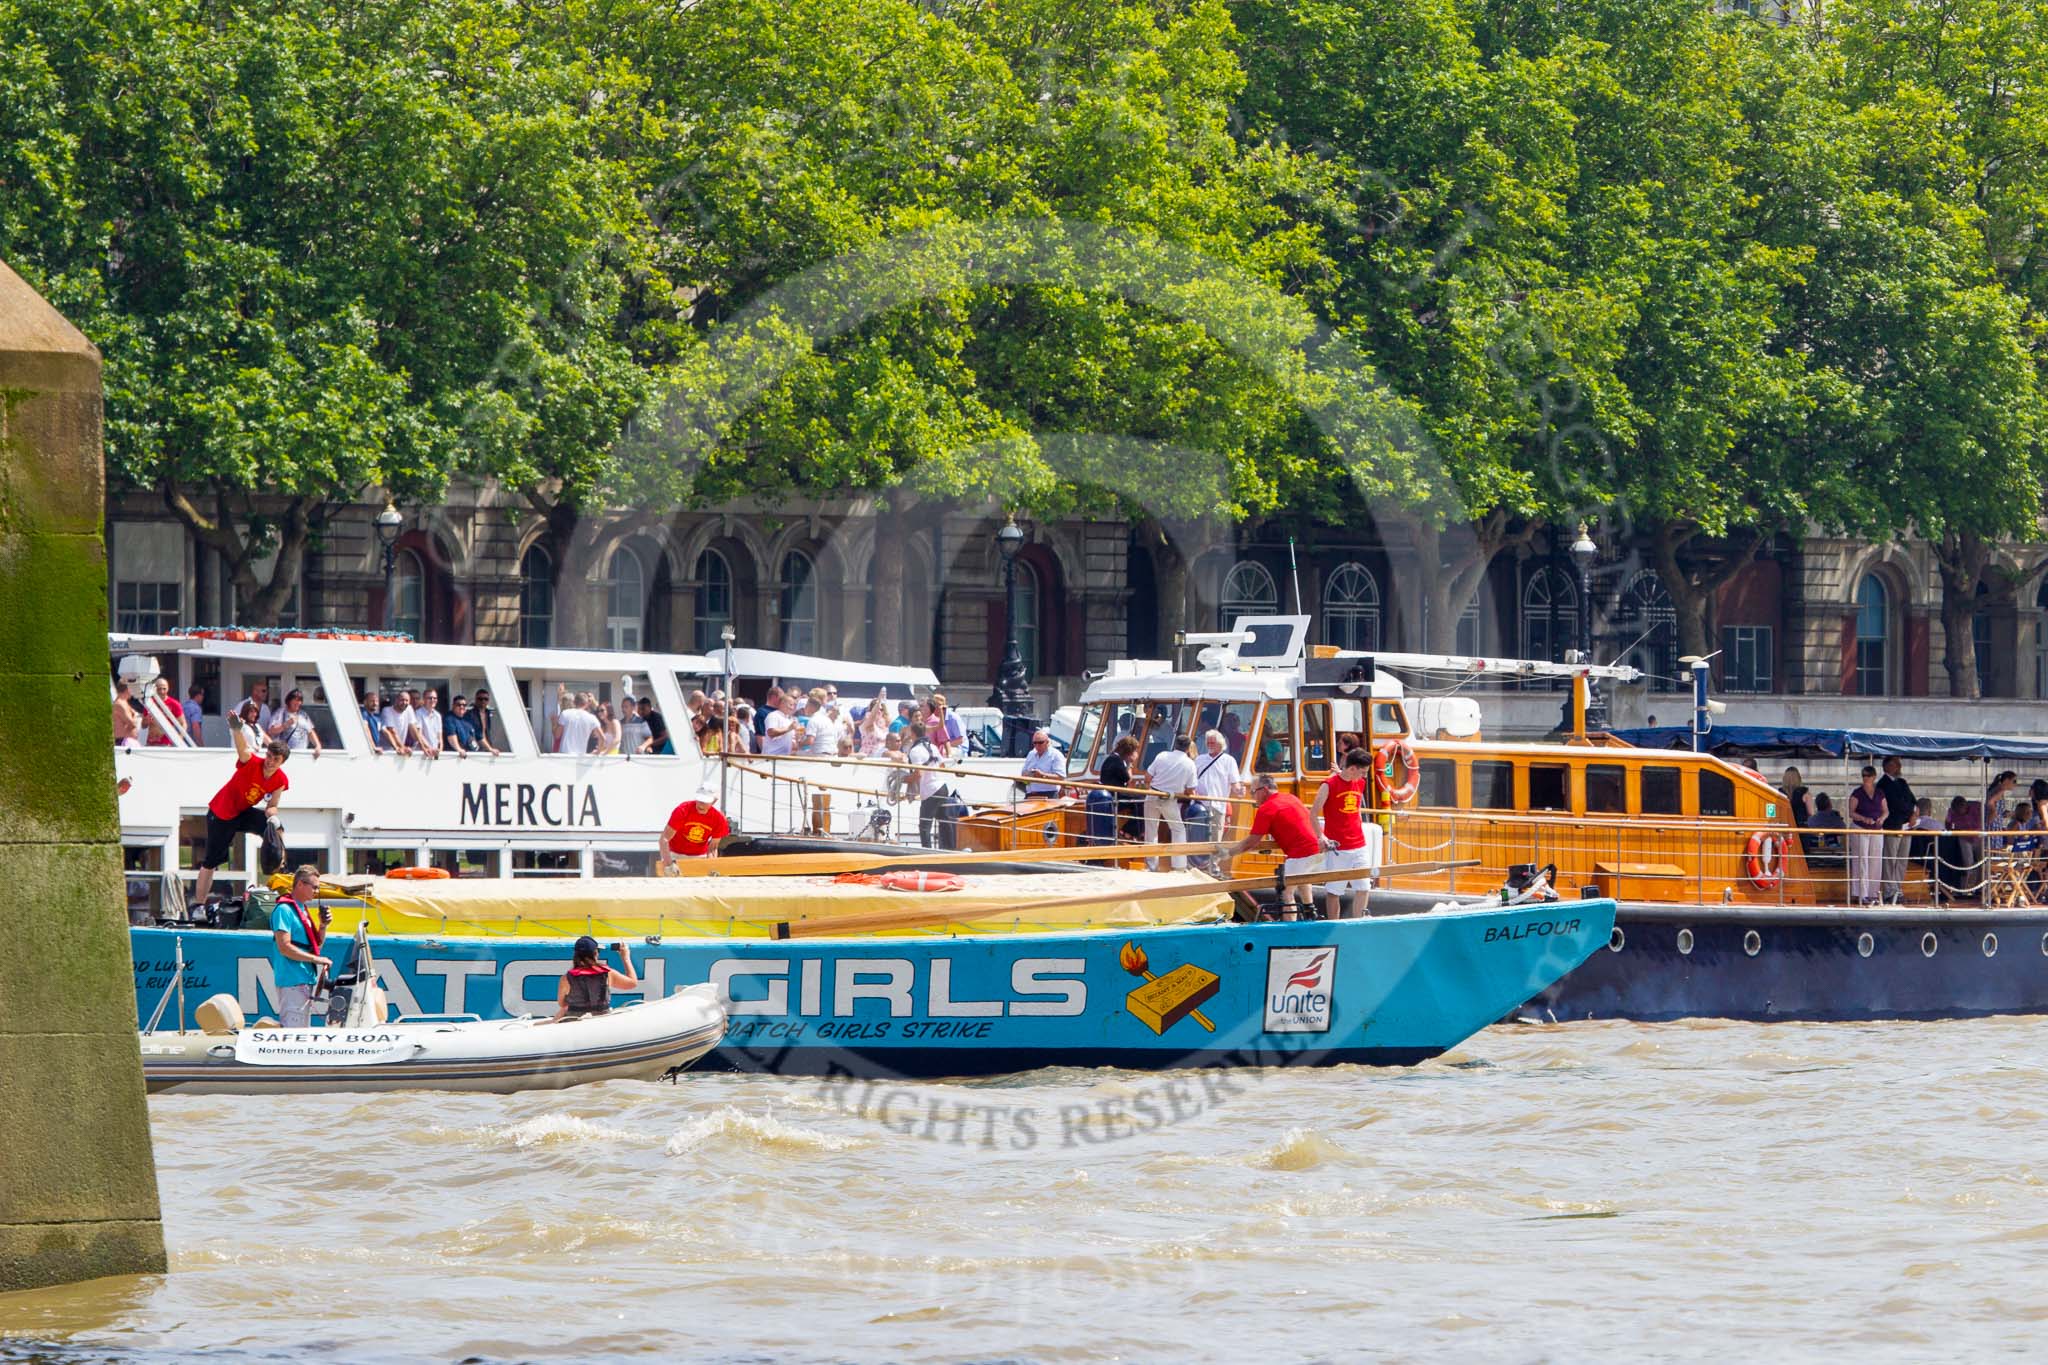 TOW River Thames Barge Driving Race 2013: Barge "The Matchgirls" by Unite the Union, behind the finish line at Westminster Bridge. On the right MV Havengore, hosting VIP guests..
River Thames between Greenwich and Westminster,
London,

United Kingdom,
on 13 July 2013 at 14:37, image #500